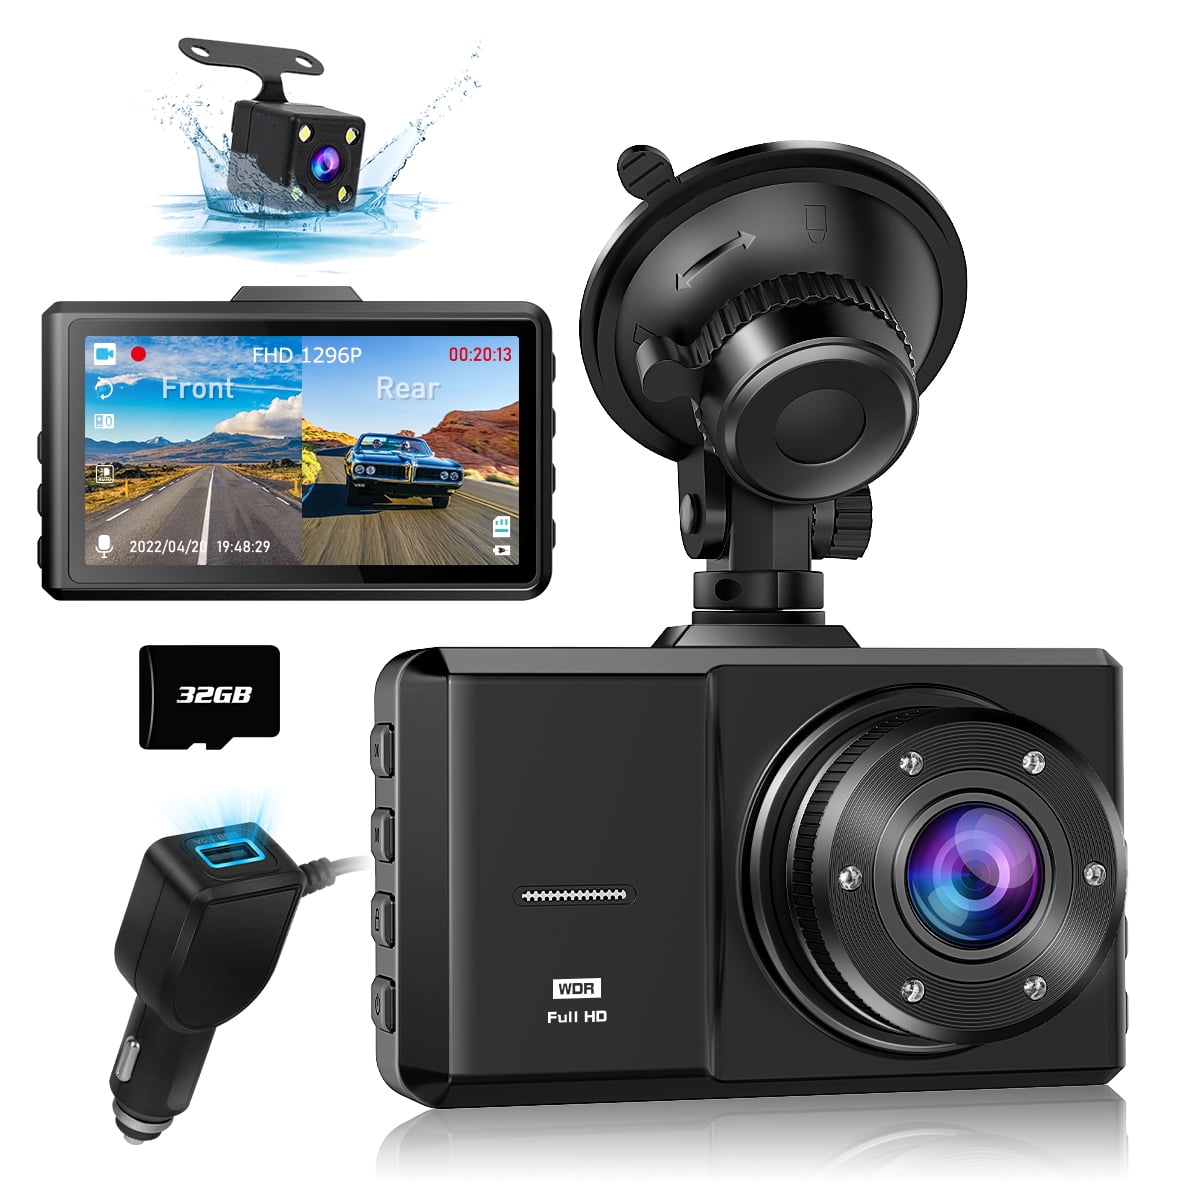 CR100 Crosstour In Car Dash Cam Mini 1080P FHD DVR Camera Video Recorder for Cars 170° Wide Angle HDR with Motion Detection Loop Recording and G-sensor 